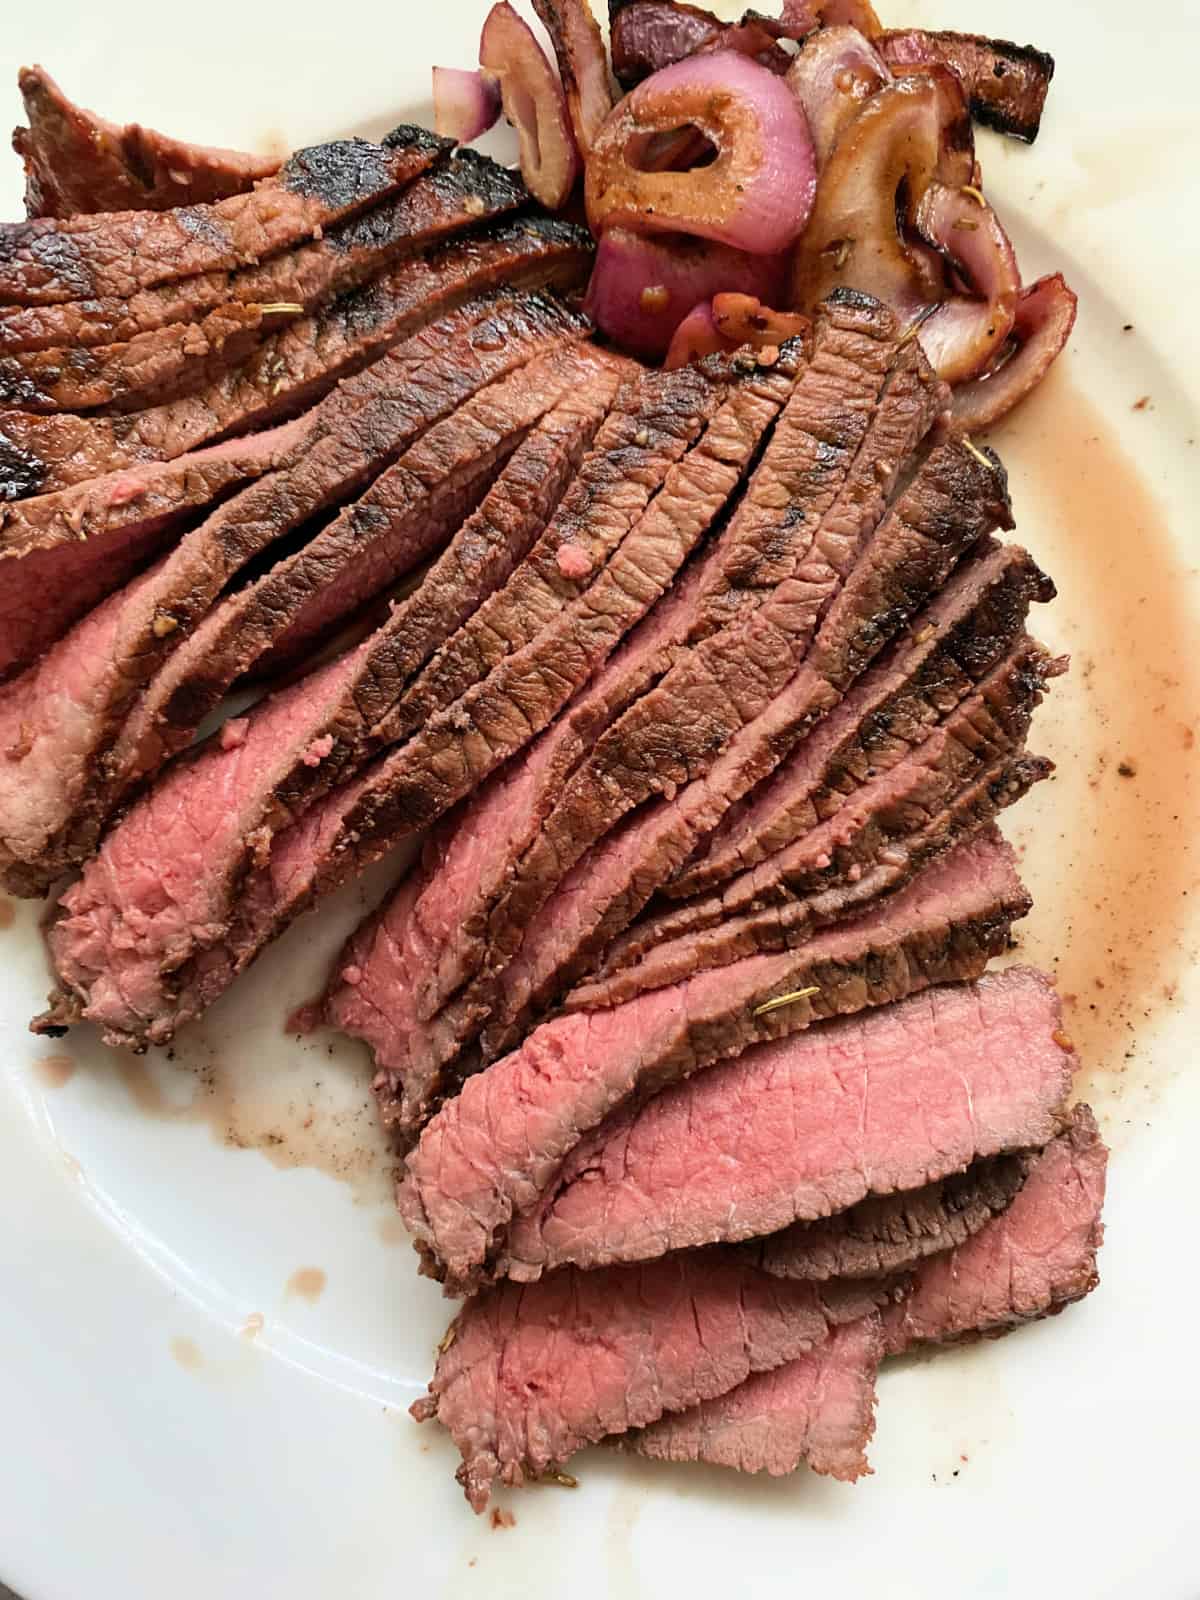 Thinly sliced rare steak with grilled onions next to it with steak juices on a white plate.